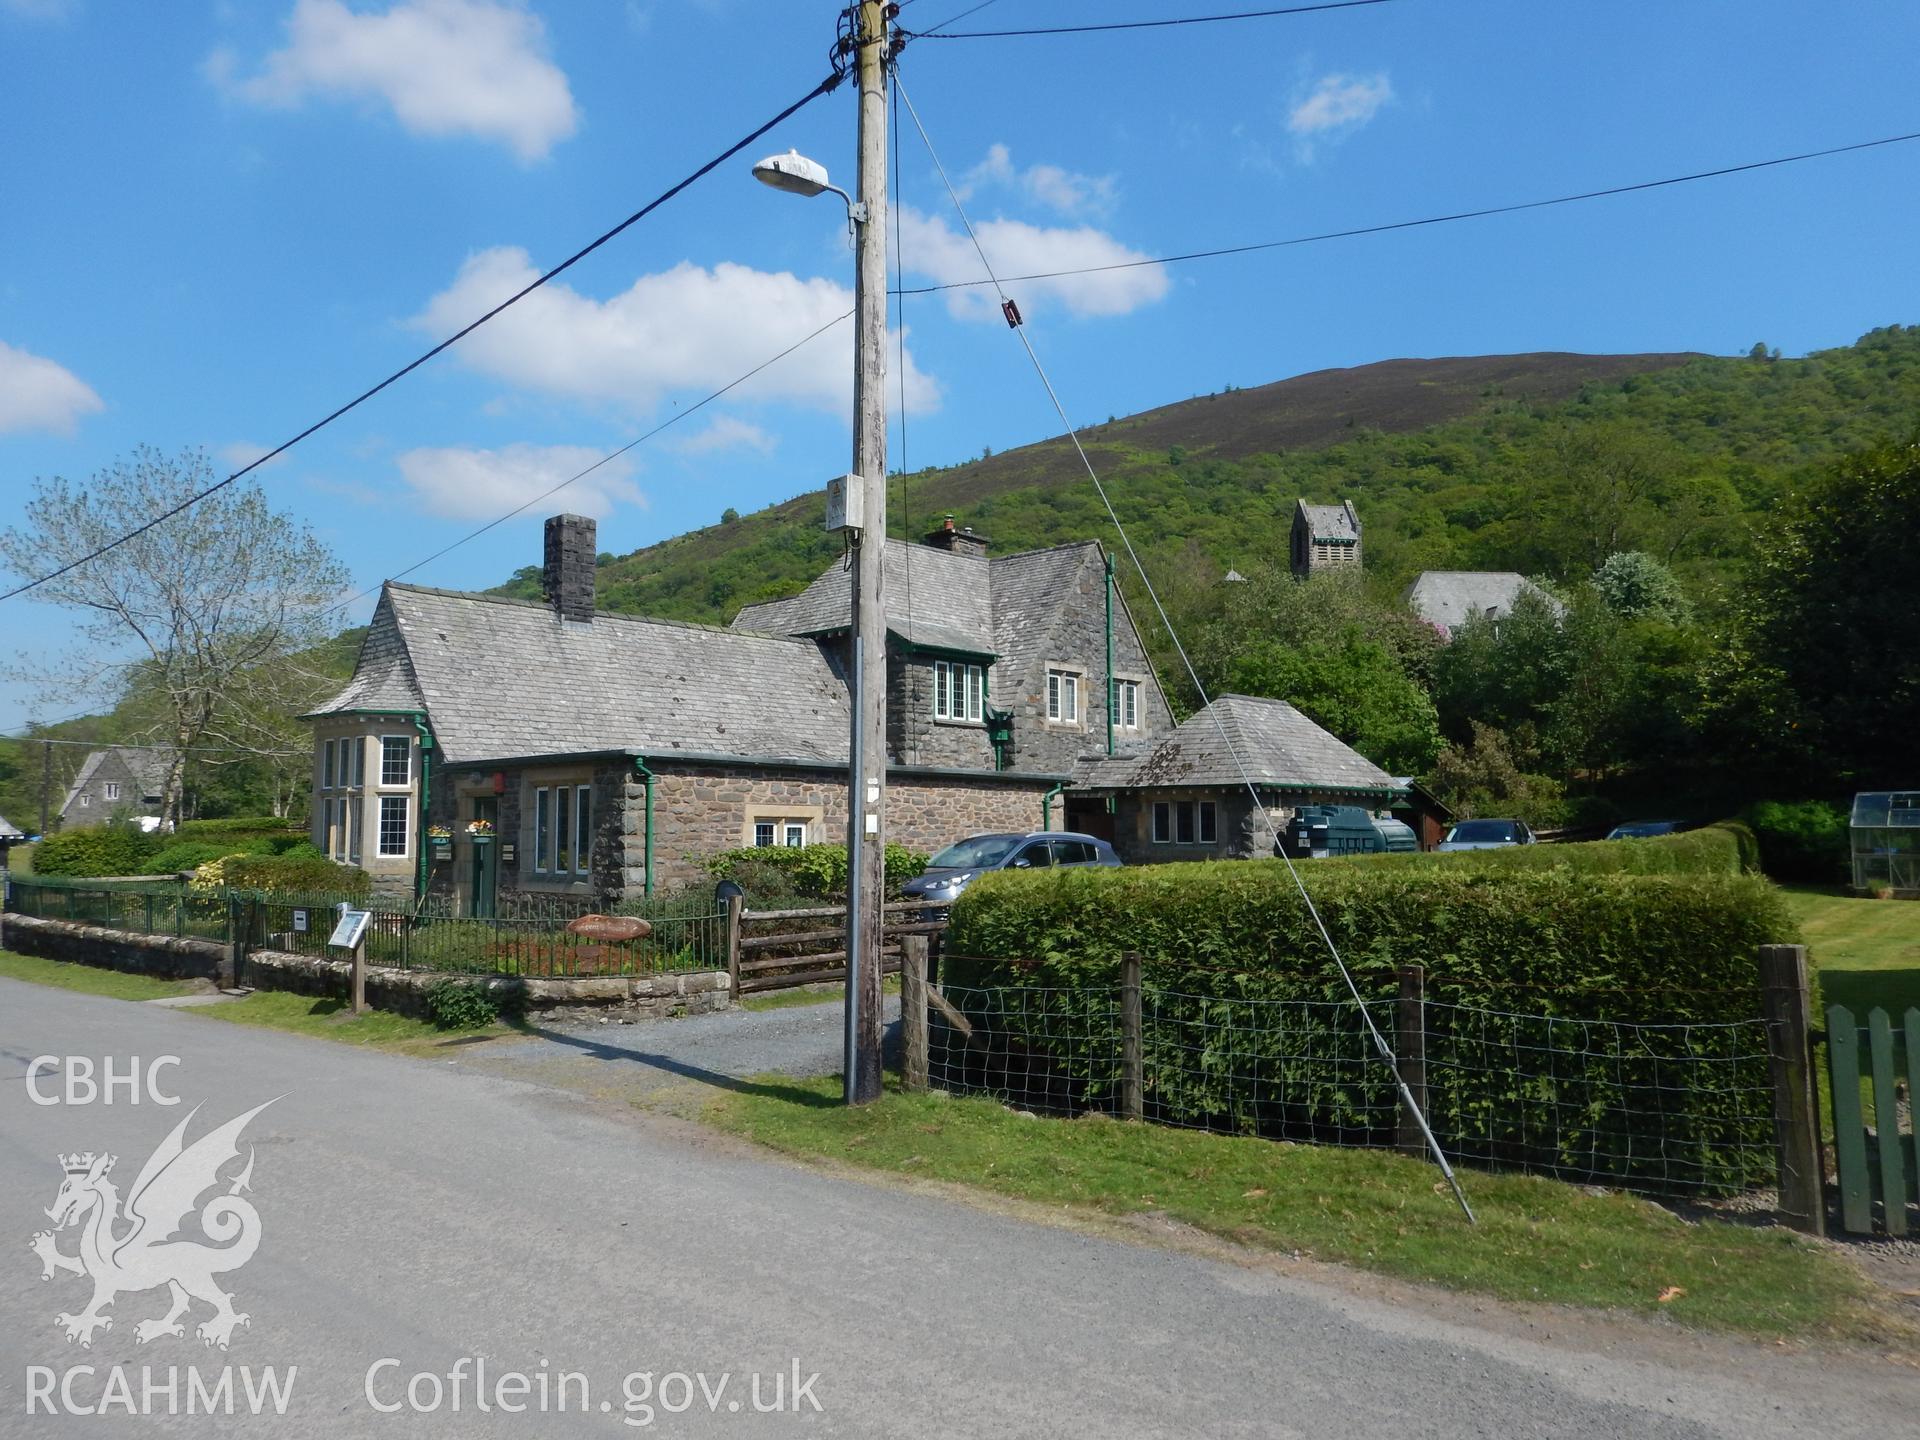 House in Arts and Crafts style in Elan Village, looking north-east. Photographed as part of Archaeological Desk Based Assessment of Afon Claerwen, Elan Valley, Rhayader. Assessment conducted by Archaeology Wales in 2018. Report no. 1681. Project no. 2573.